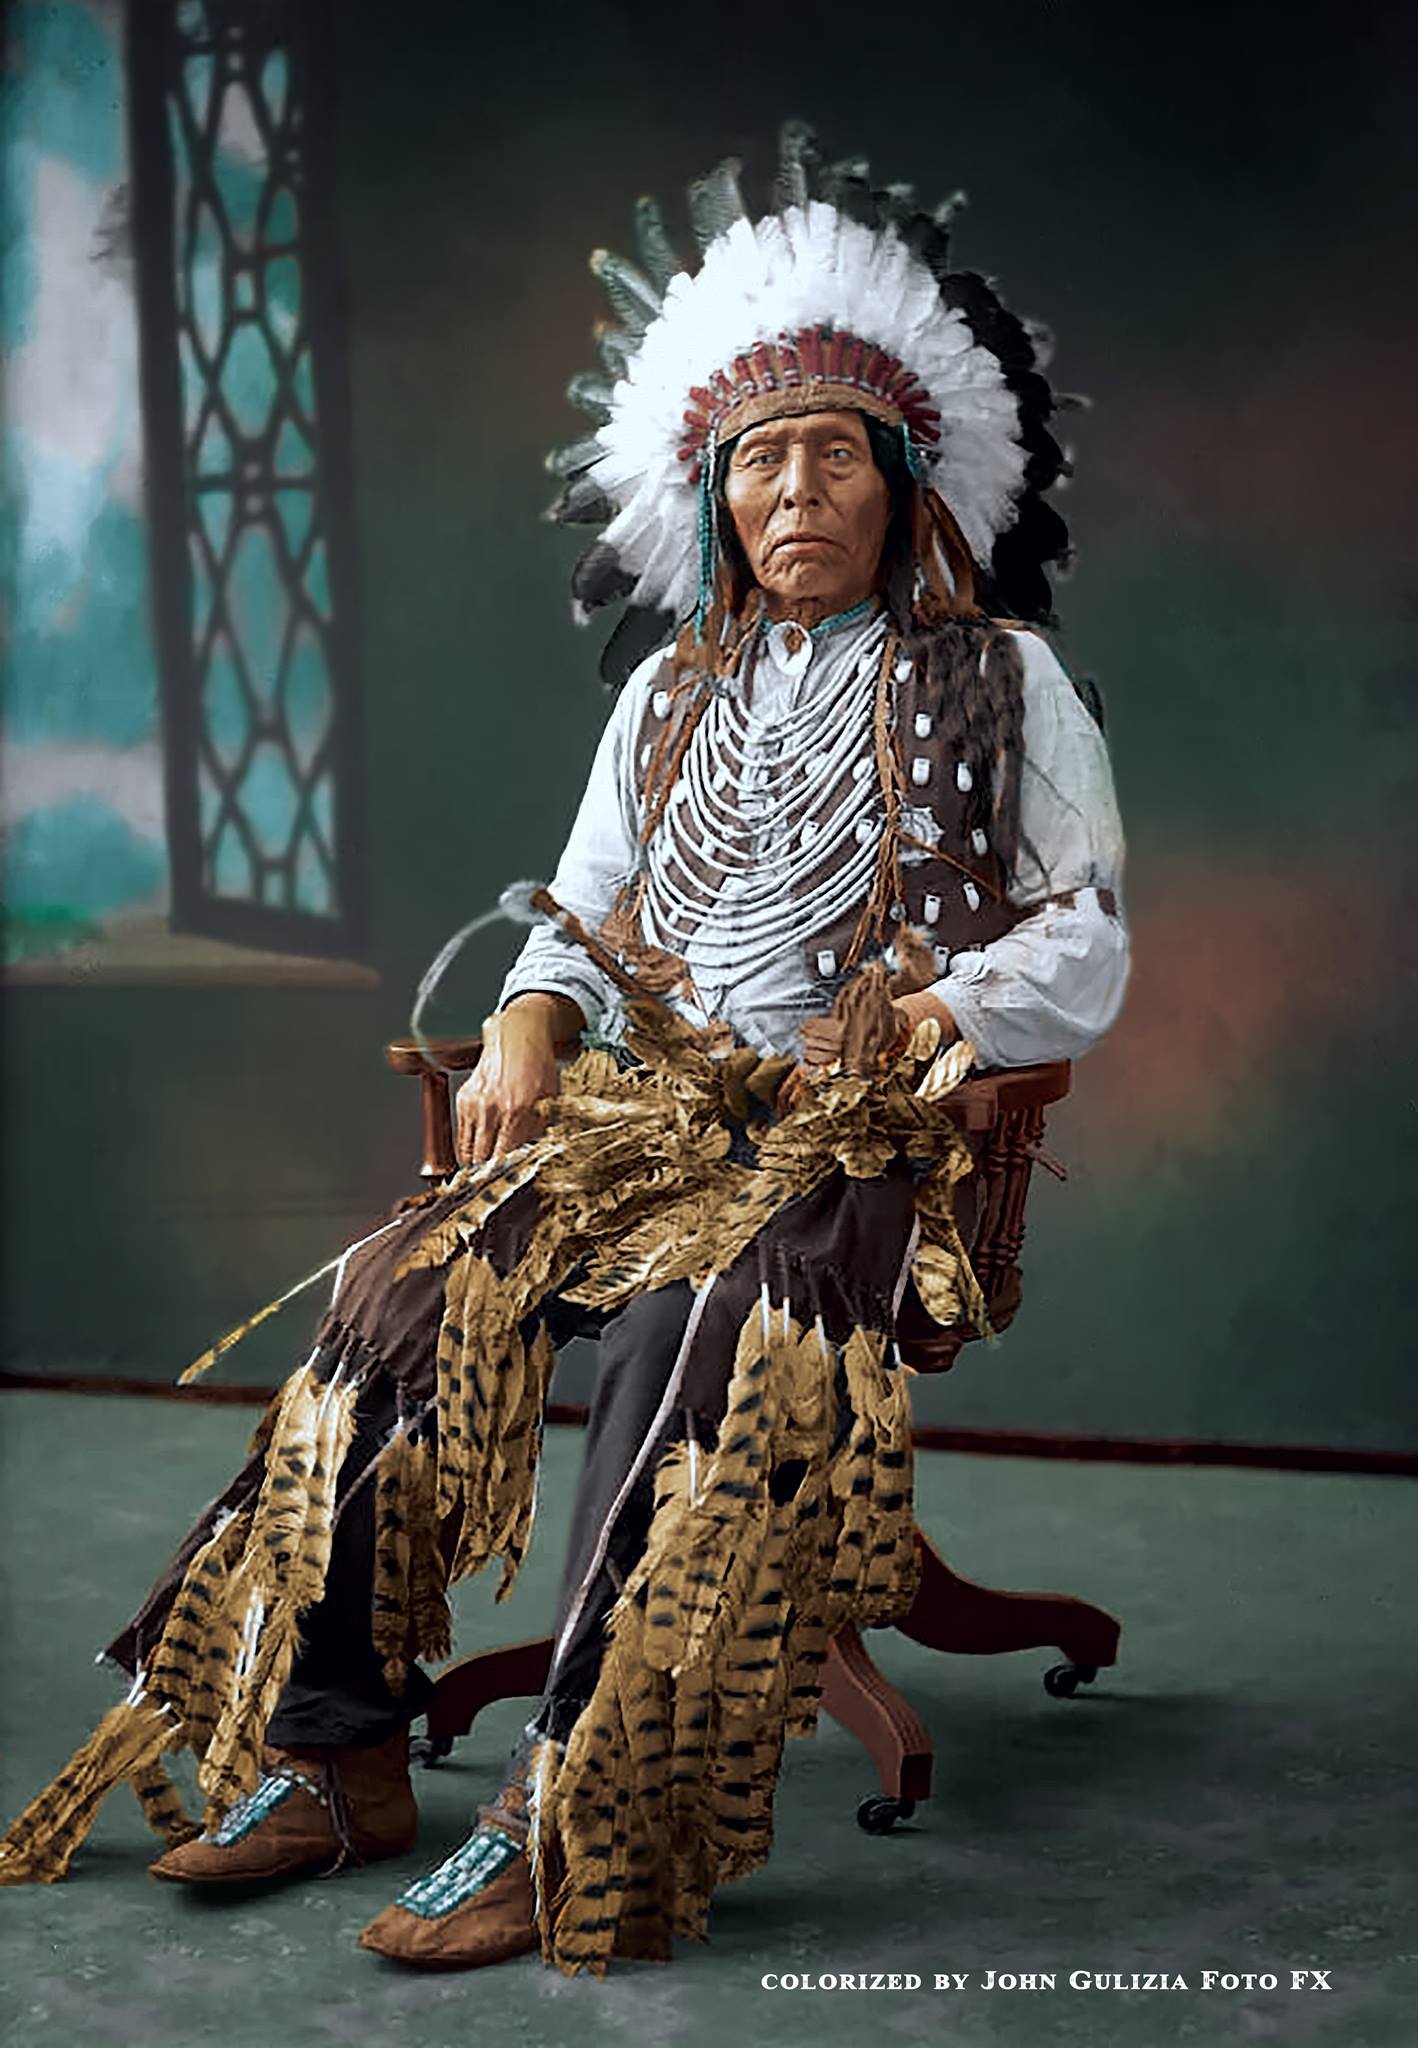 Rare Colorized Native American Images From The Past-7641